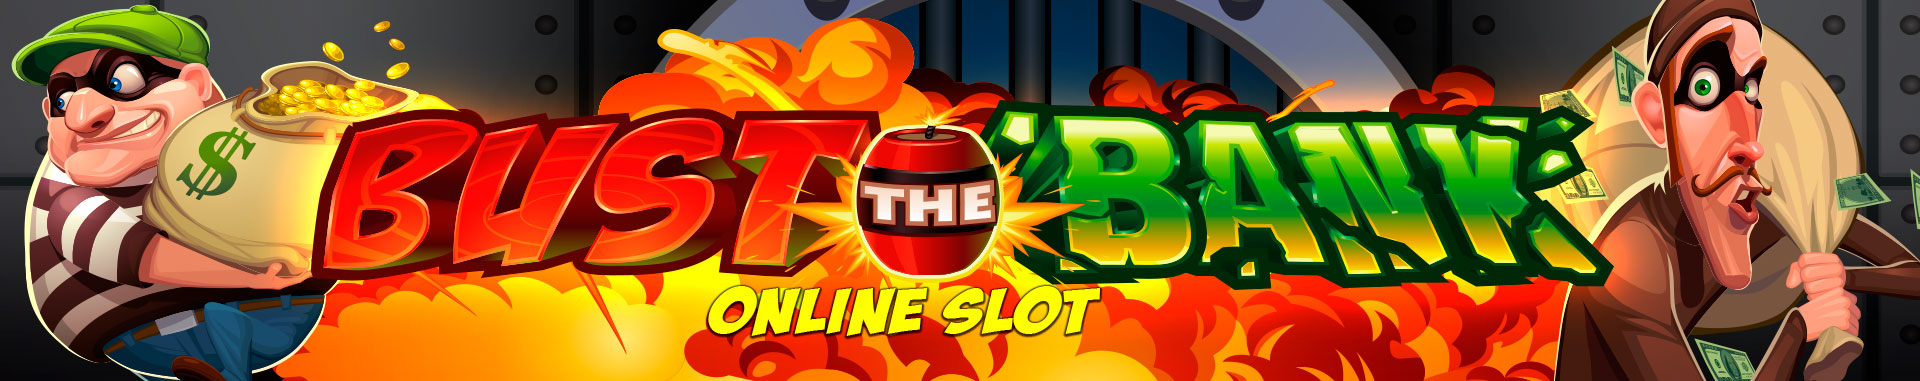 bust the bank slot review microgaming